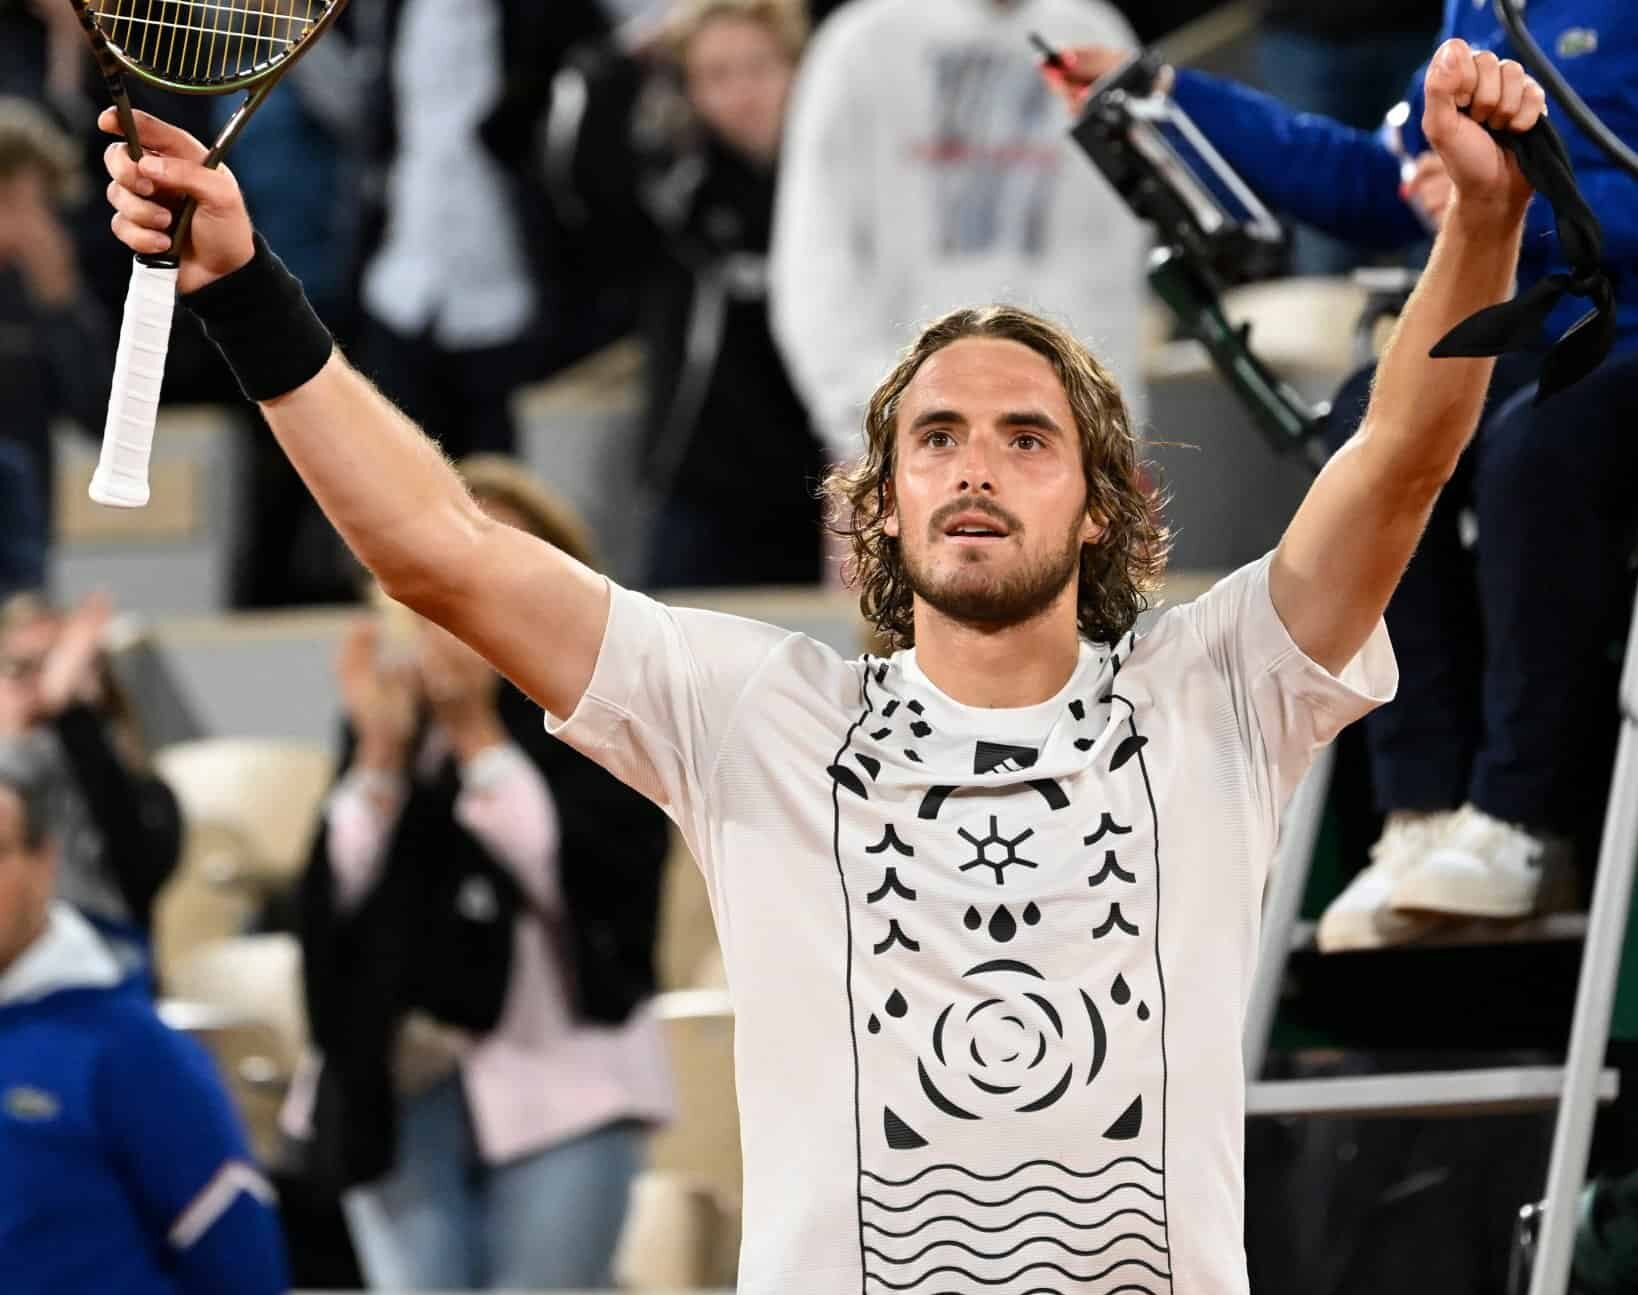 Stefanos Tsitsipas overcomes two sets to love deficit to defeat Musetti and reach round 2 25